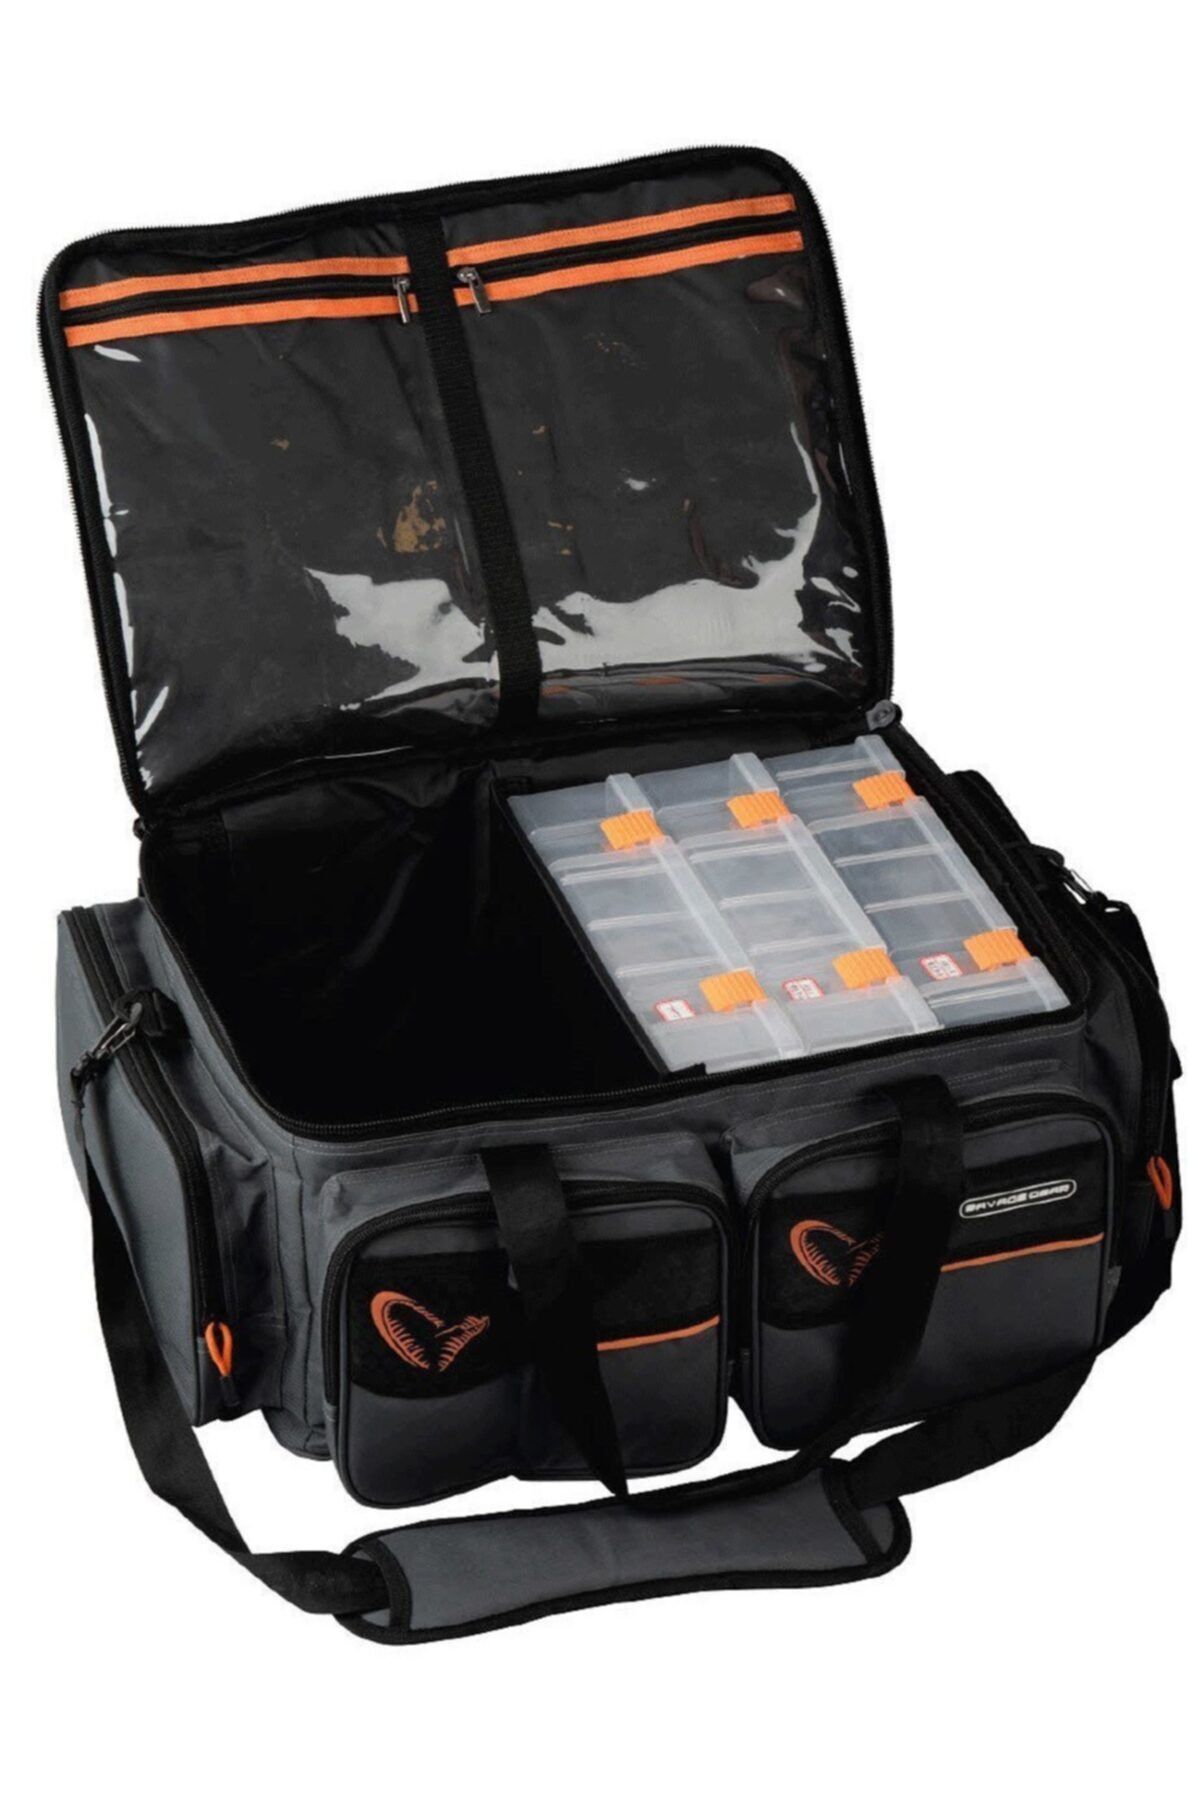 Savage Gear System Box Bag Xl 3 Boxes ve Waterproof Cover